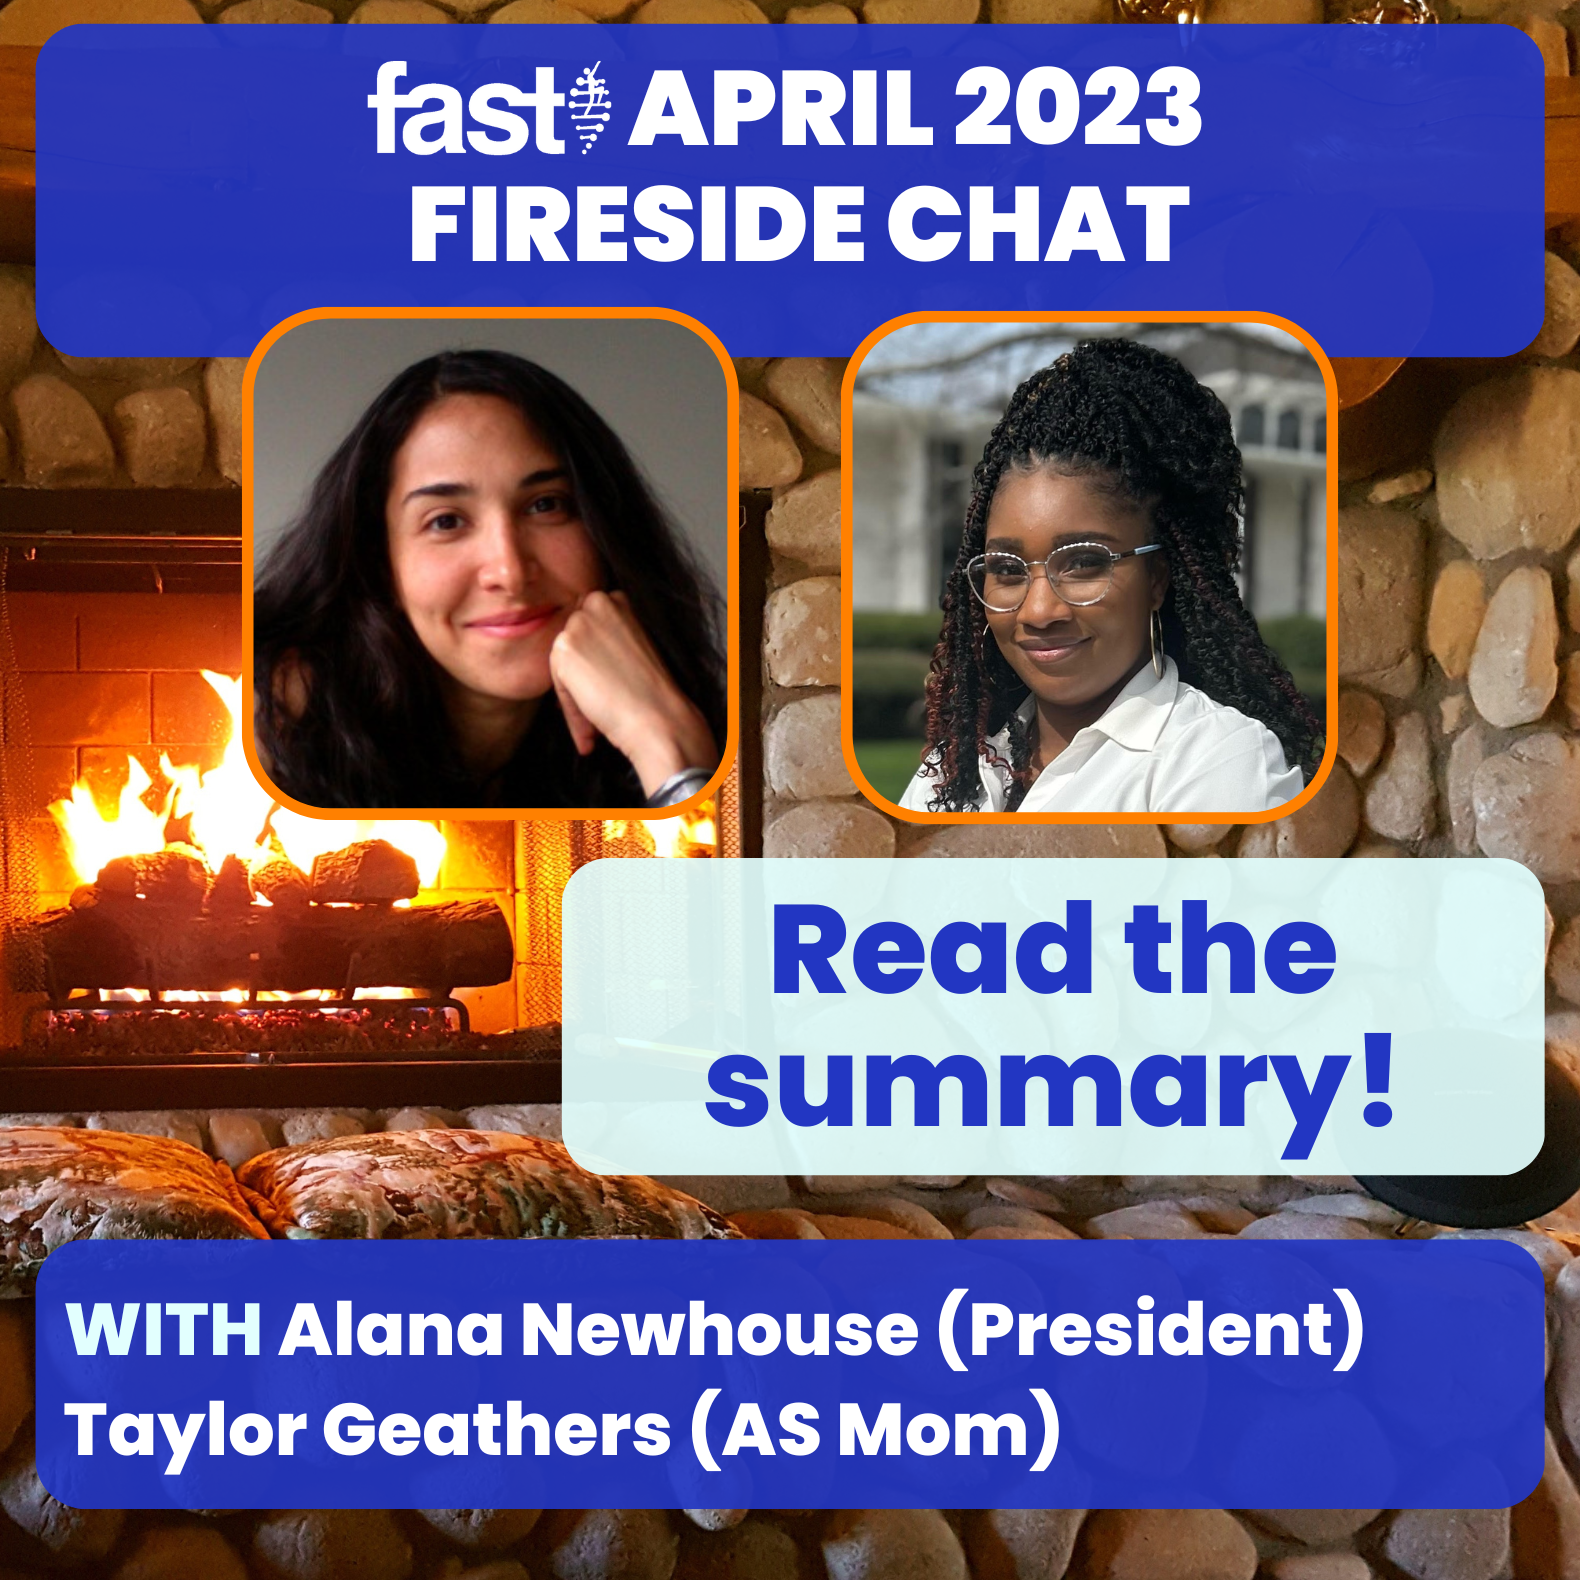 FAST April 2023 Fireside Chat -Read the summary! With Alana Newhouse (President) and Taylor Geathers (AS Mom), with photos of Alana and Taylor